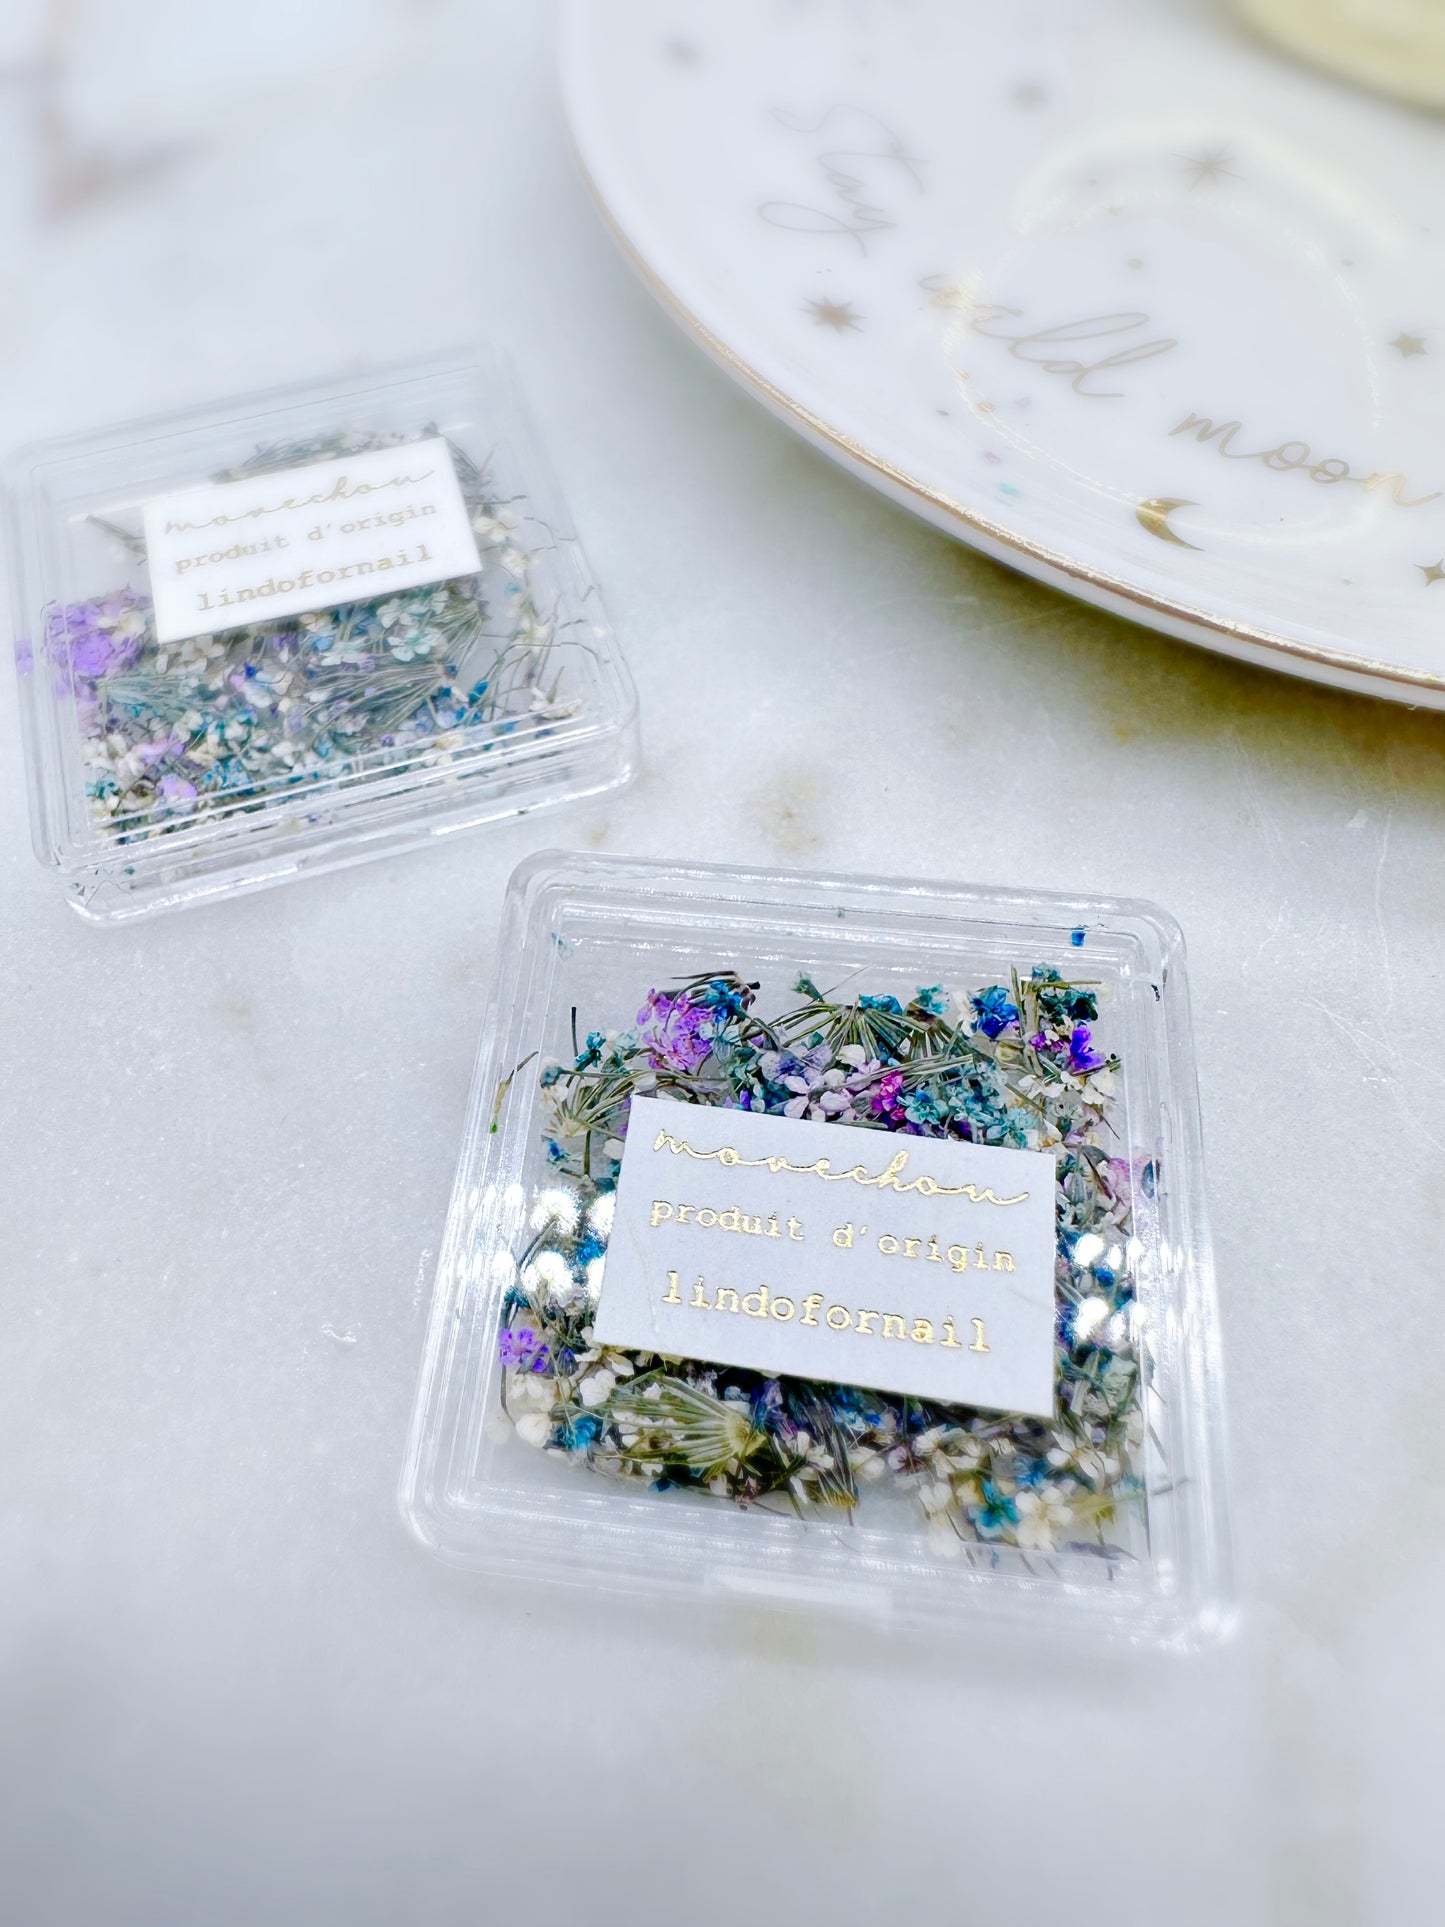 Shredded Lace Flowers in a box (White, Lilac and Navy)